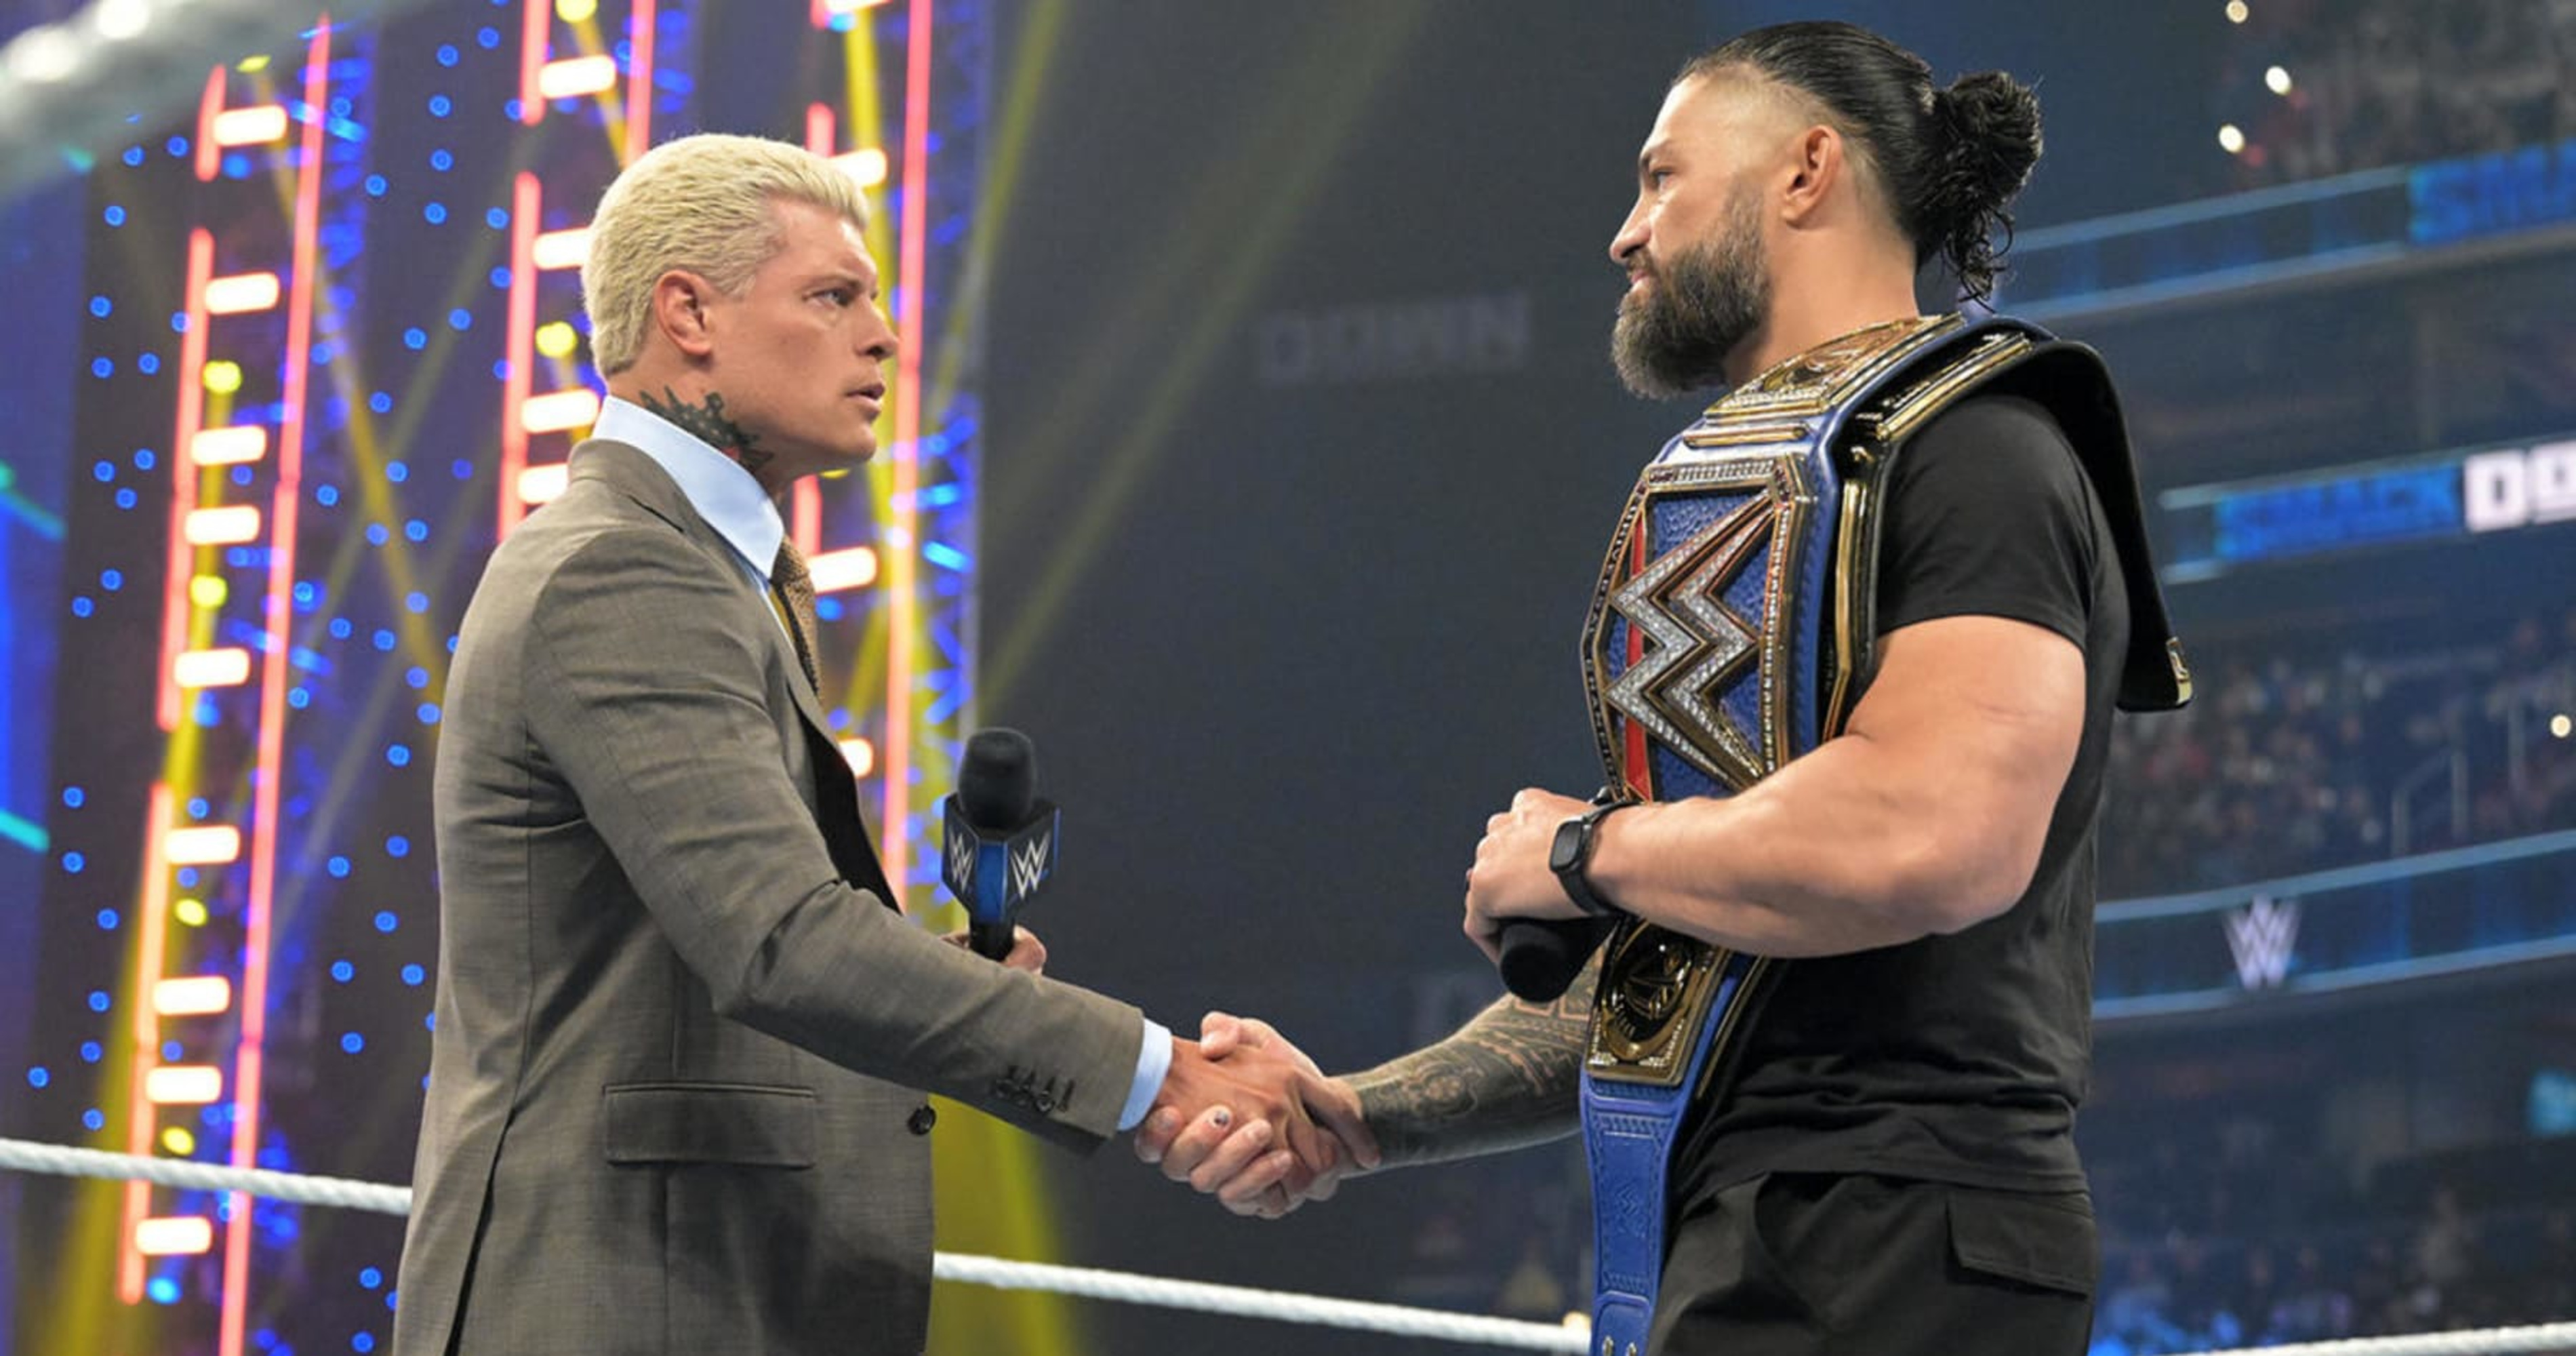 The Rock and Roman Reigns Should Not Main Event WrestleMania